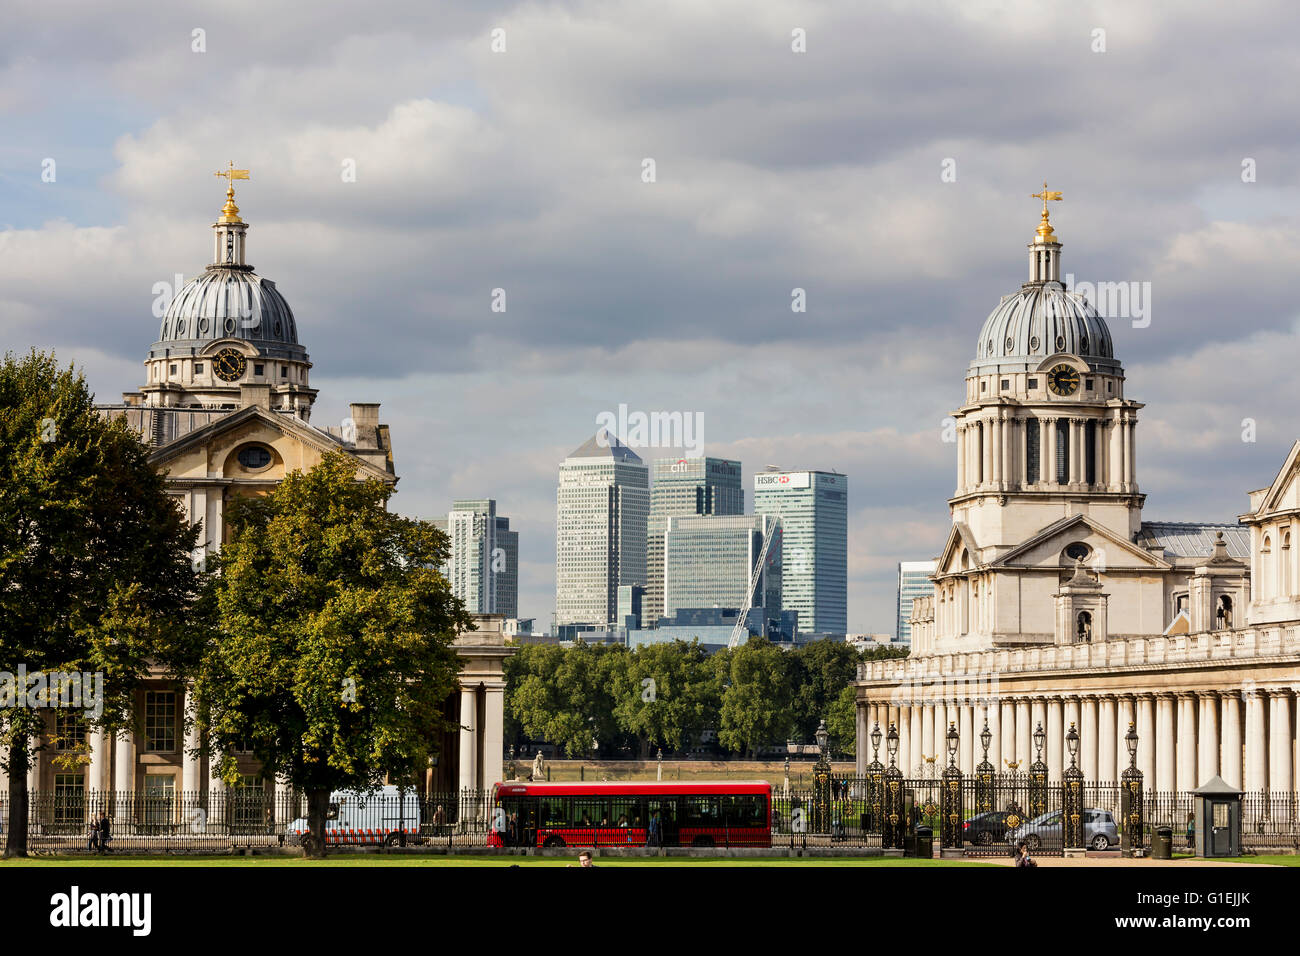 View of the landmark buildings of Canary Wharf and the Royal Naval College in London Stock Photo